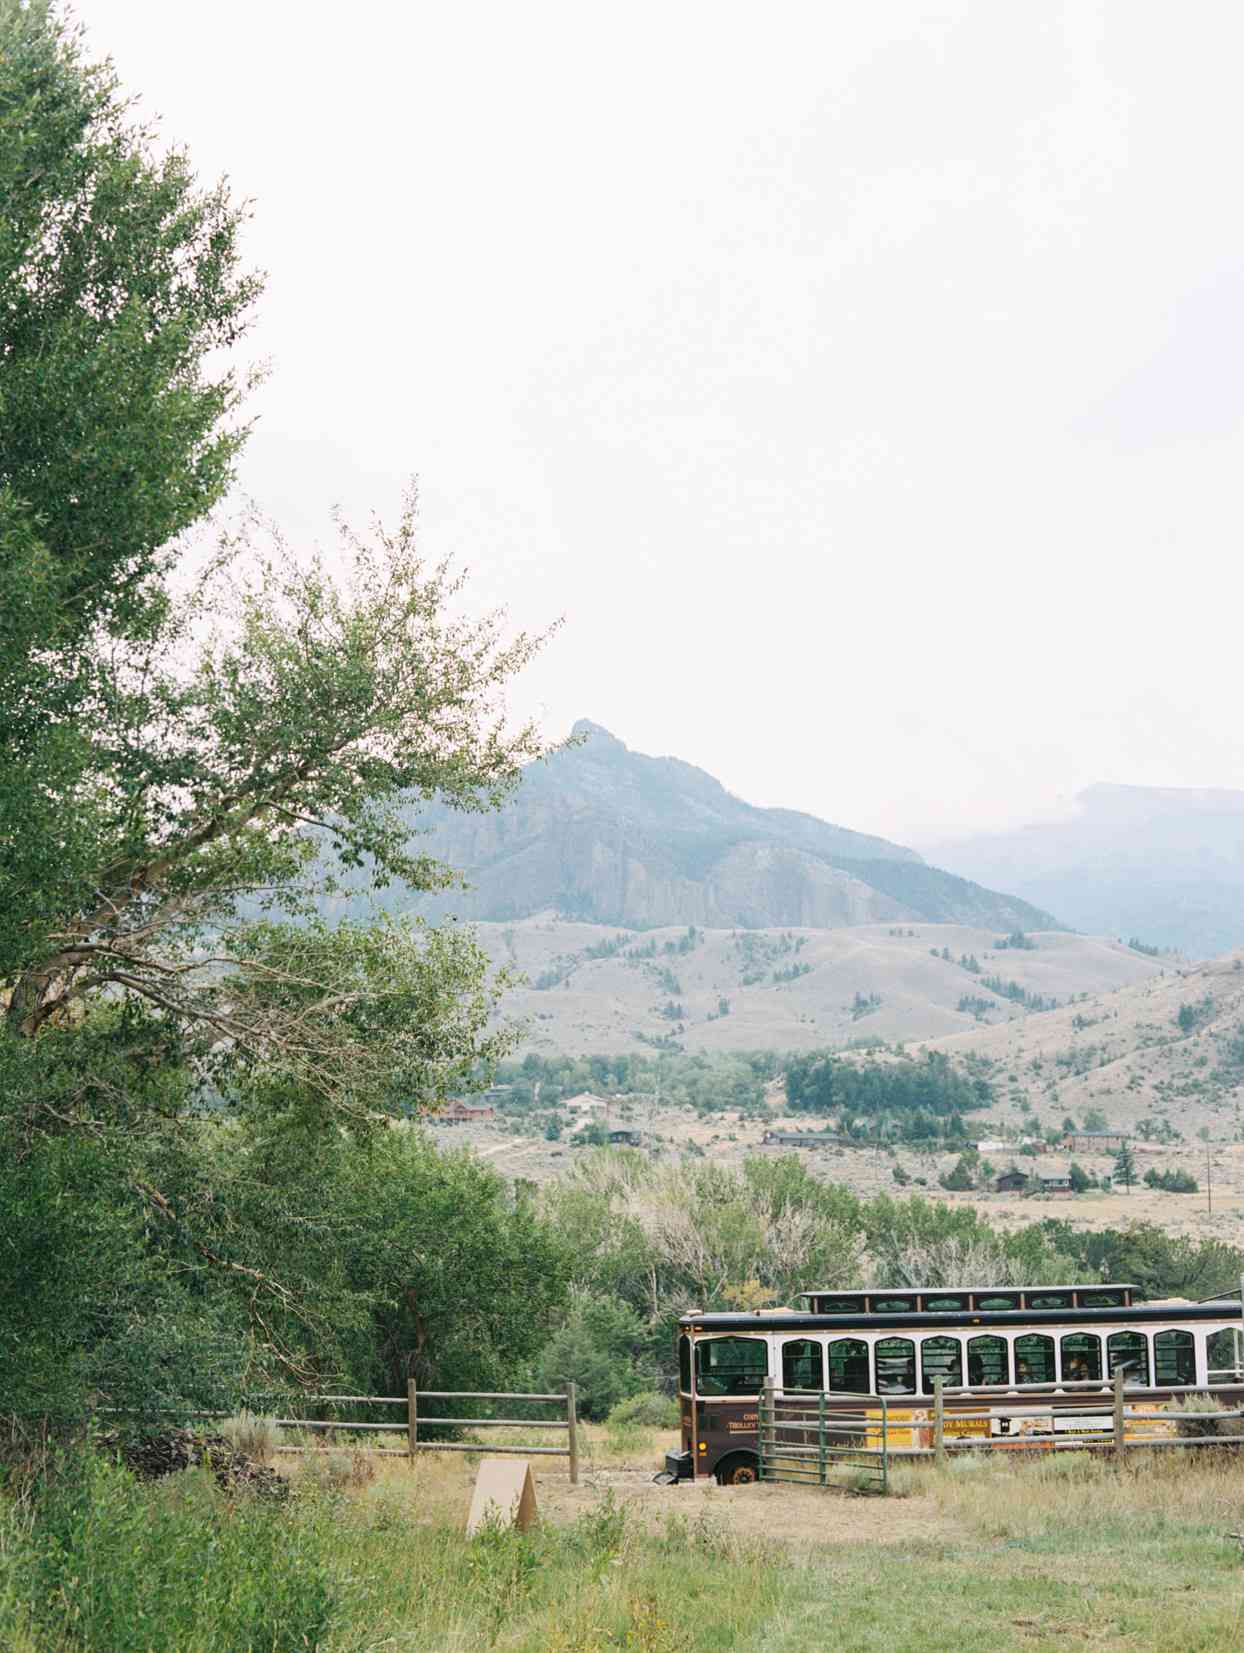 wedding trolly for guests driving on gravel road